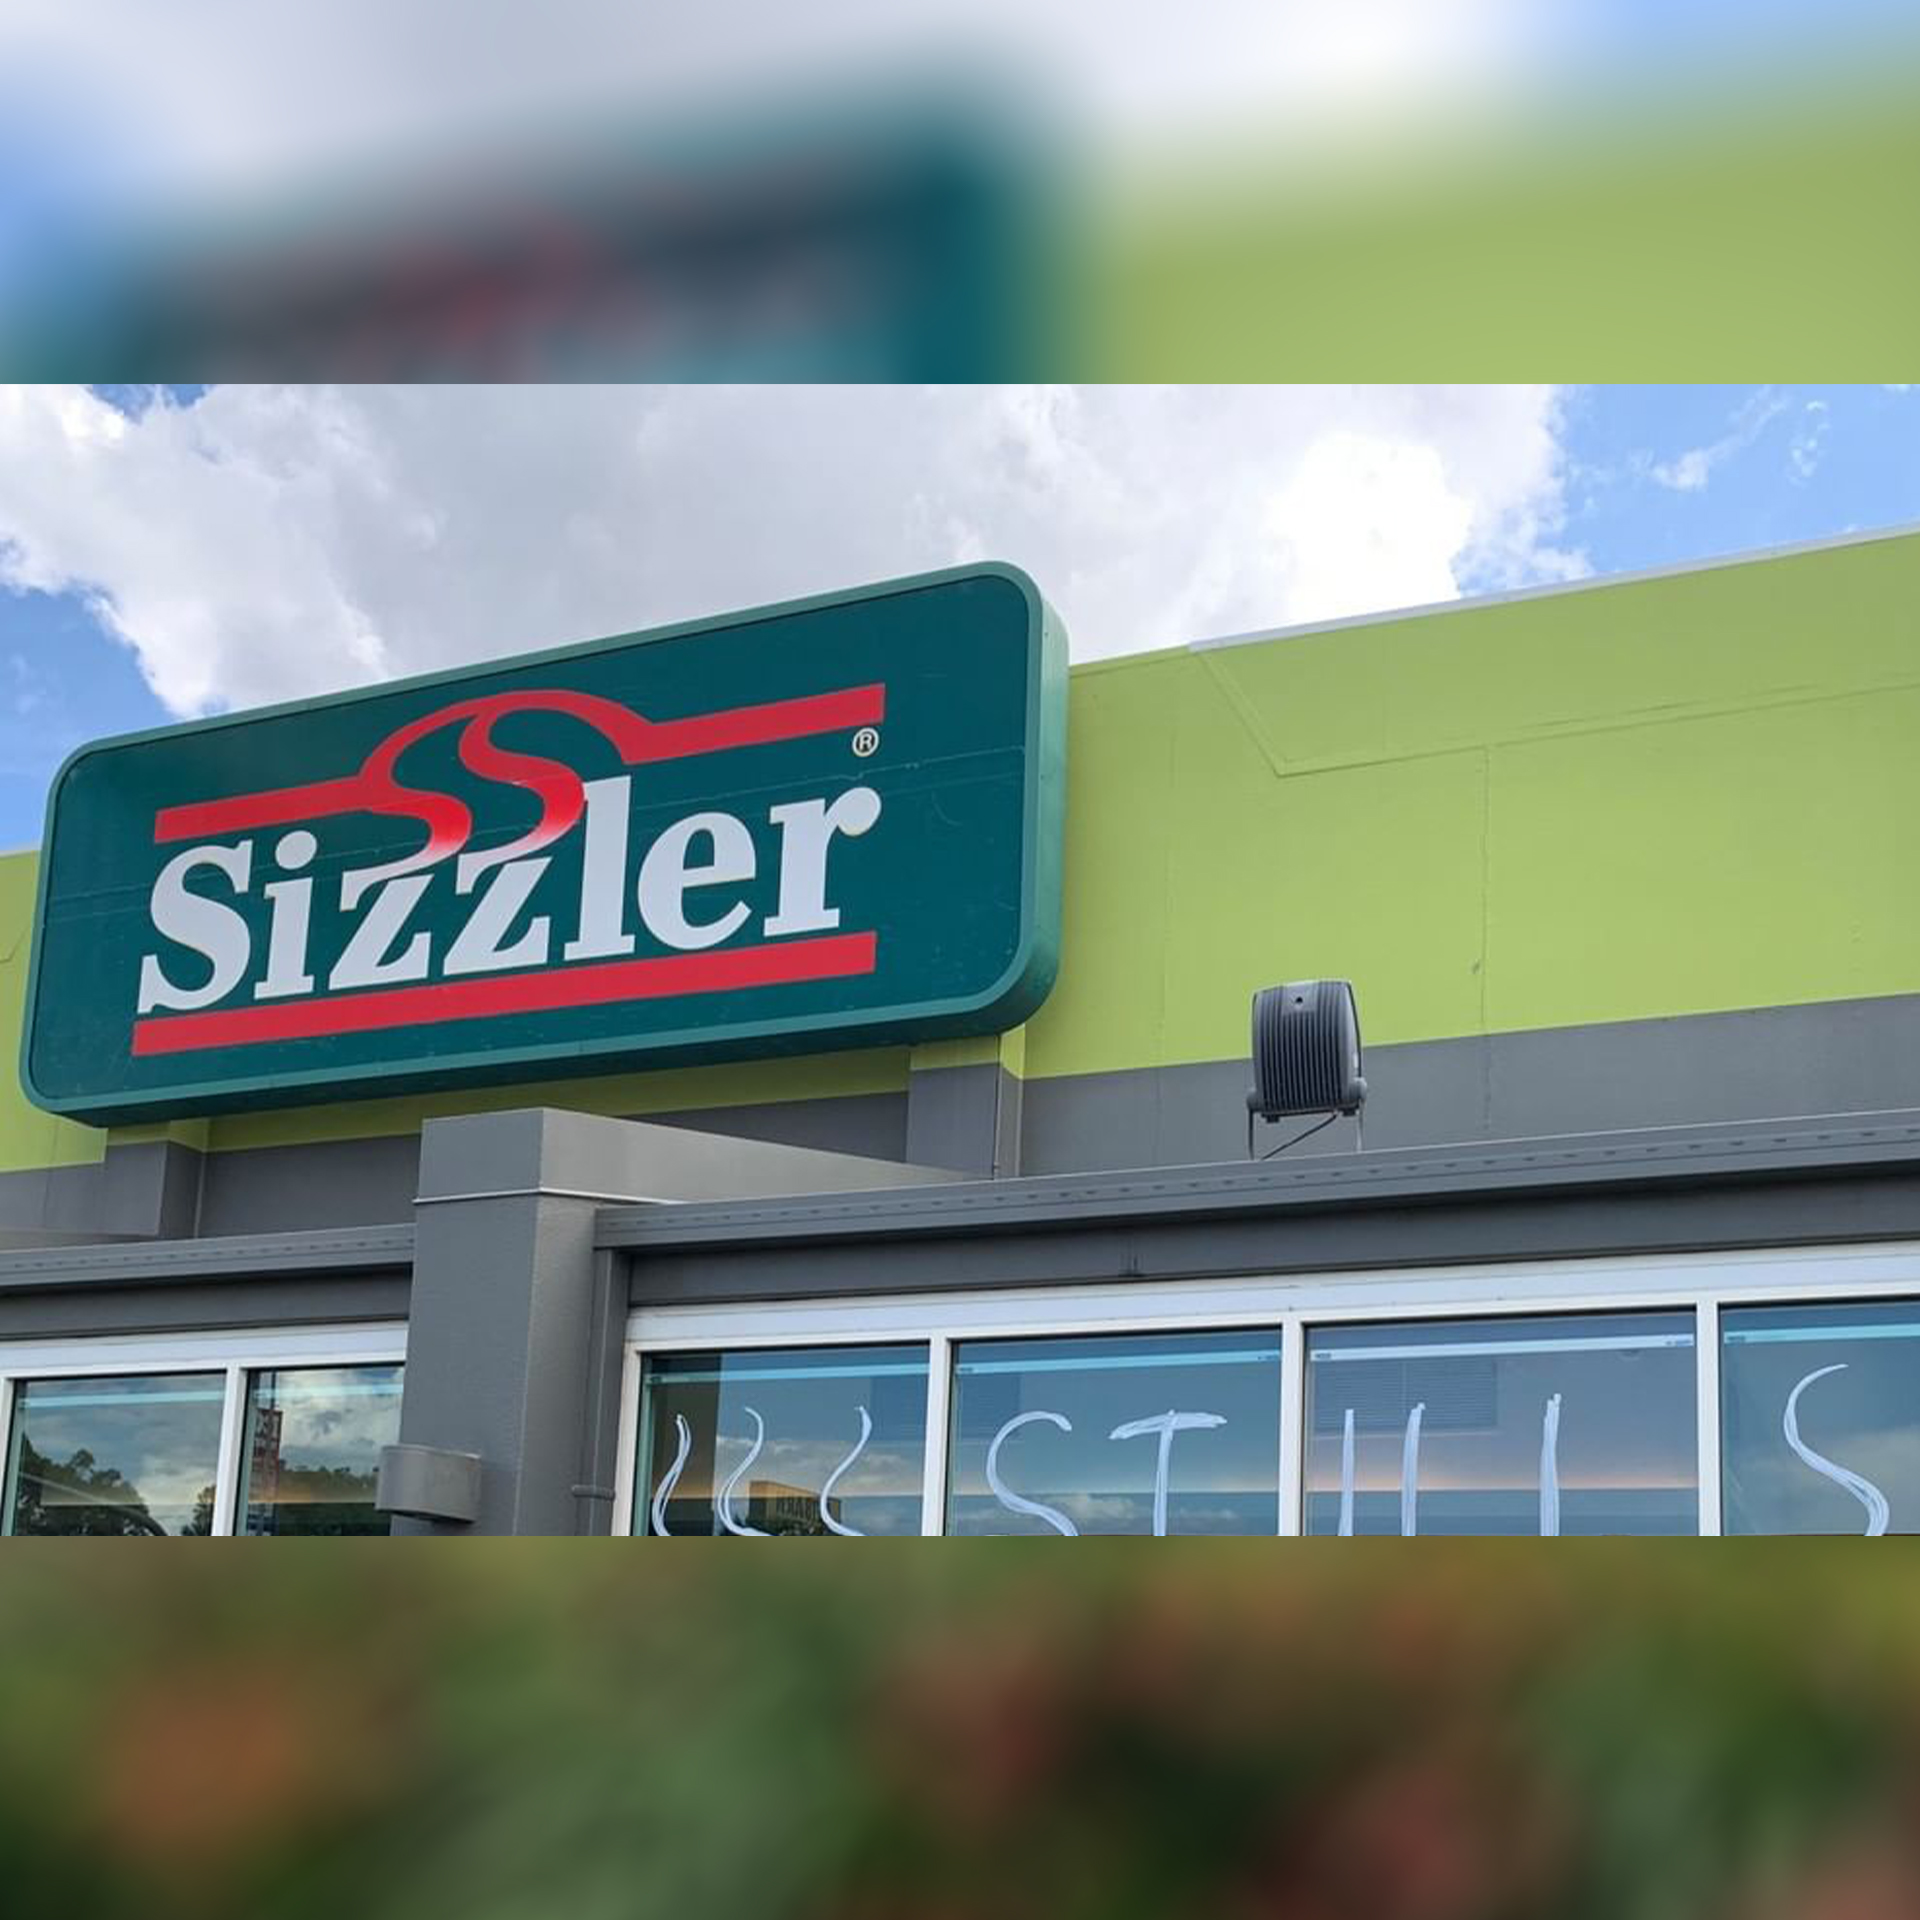 HIGHLIGHT: Sizzler Might Be Closing Down So Let's All Enjoy One Last Meal There Together!